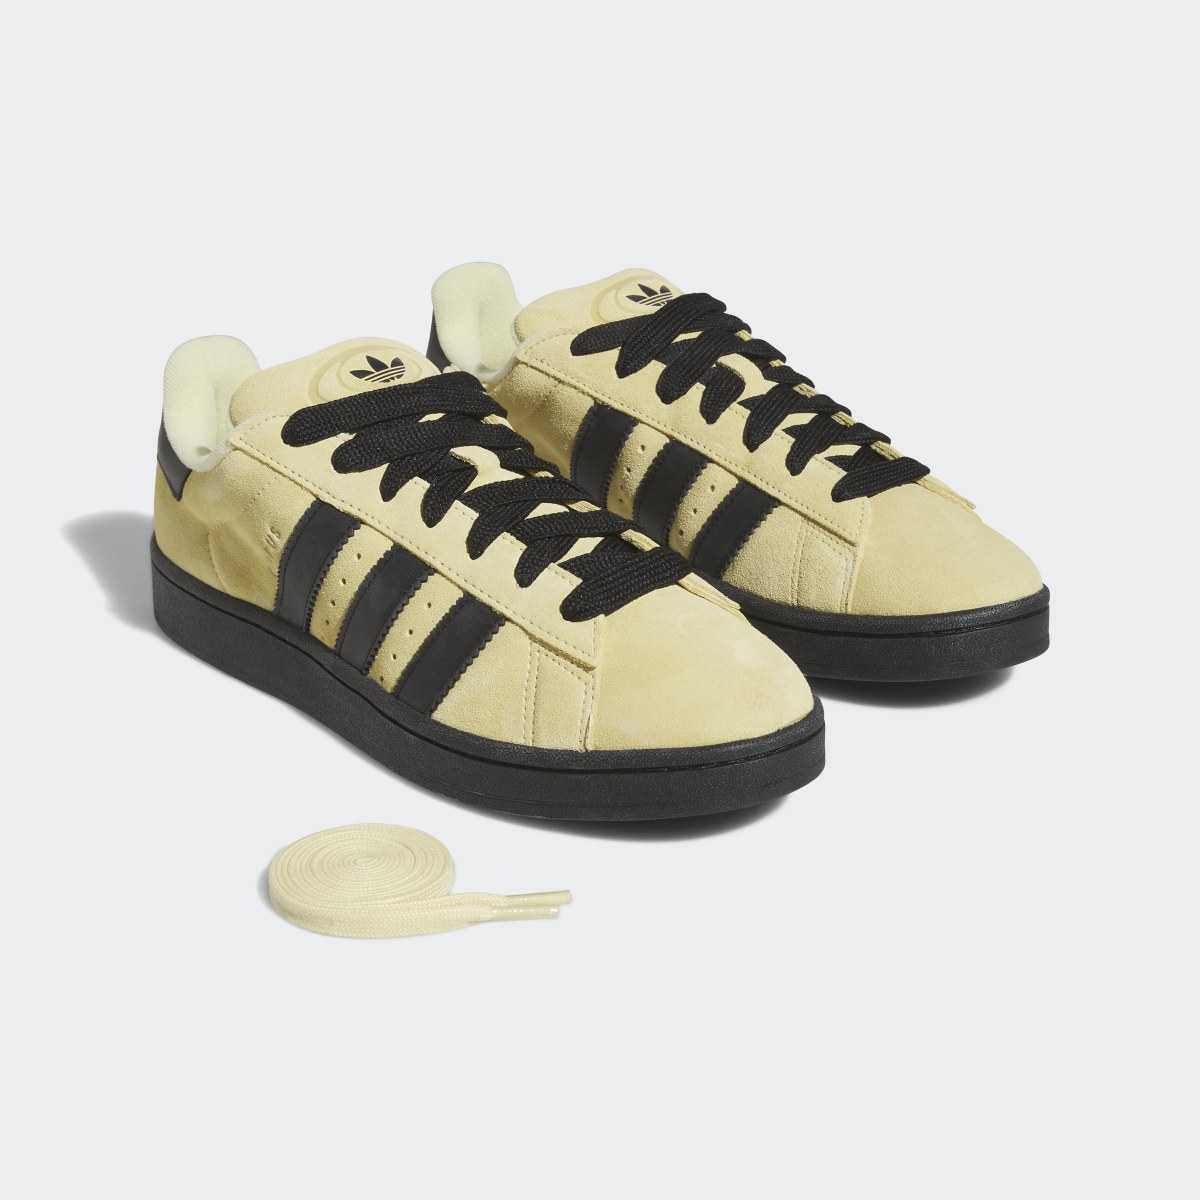 Adidas Campus 00s Shoes. 10